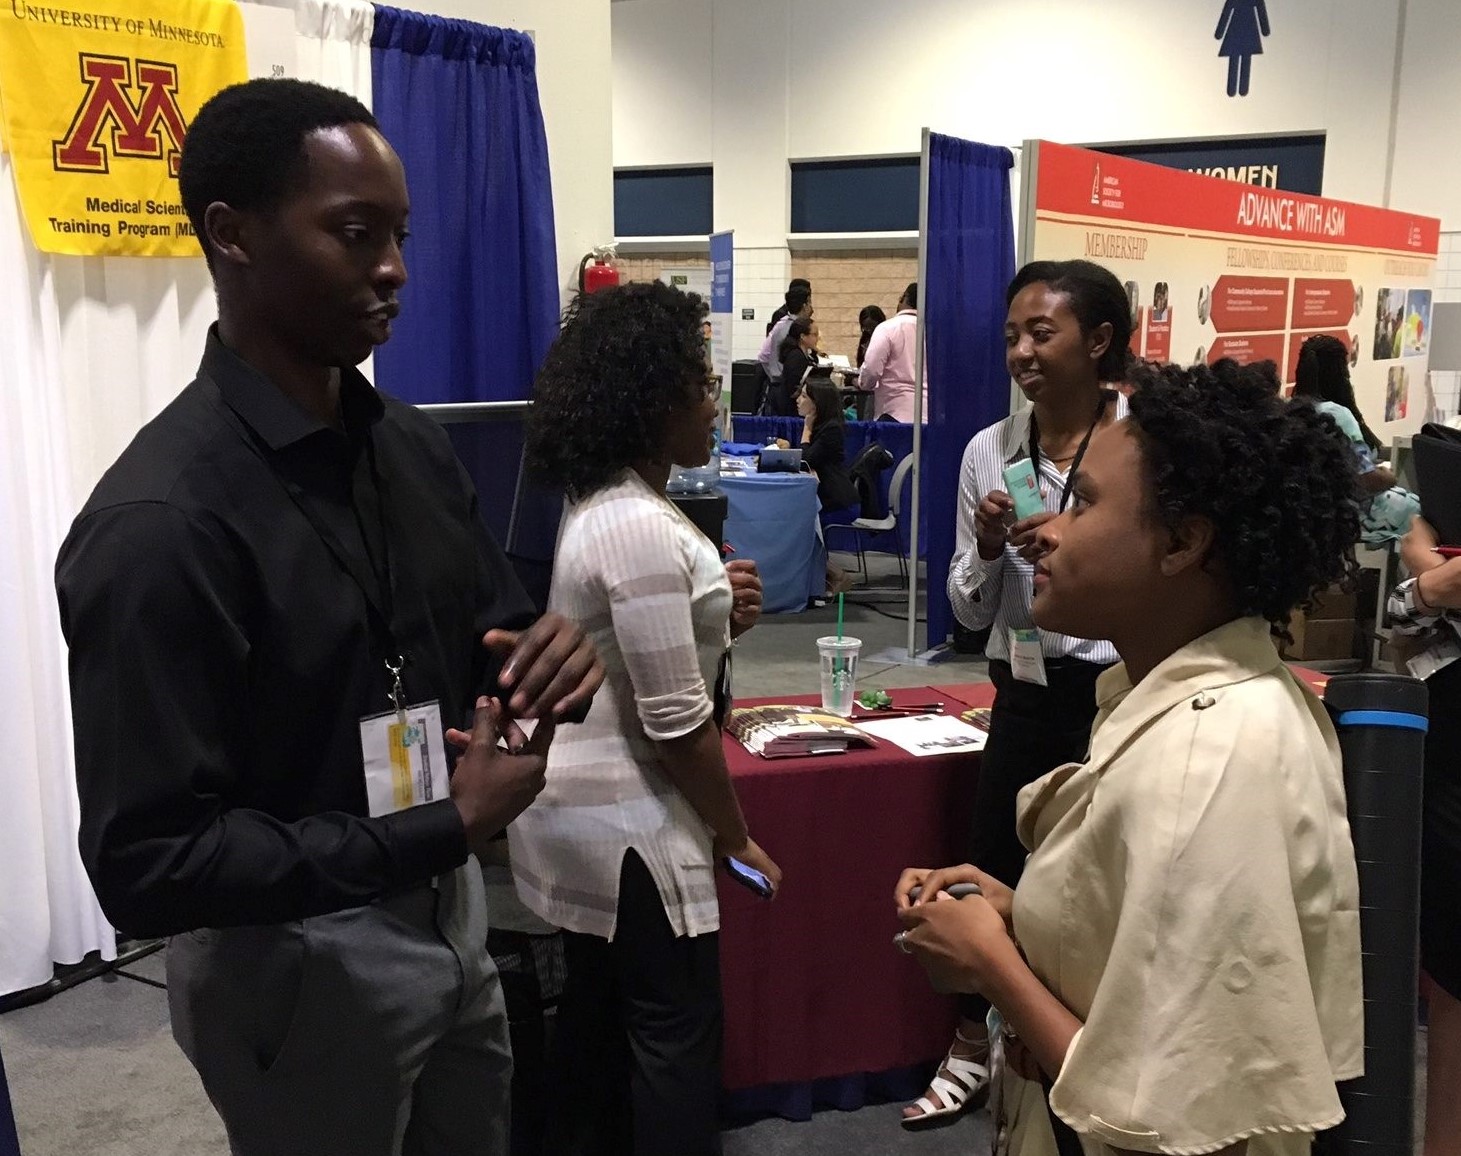 UMN MSTP students meeting with potential applicants